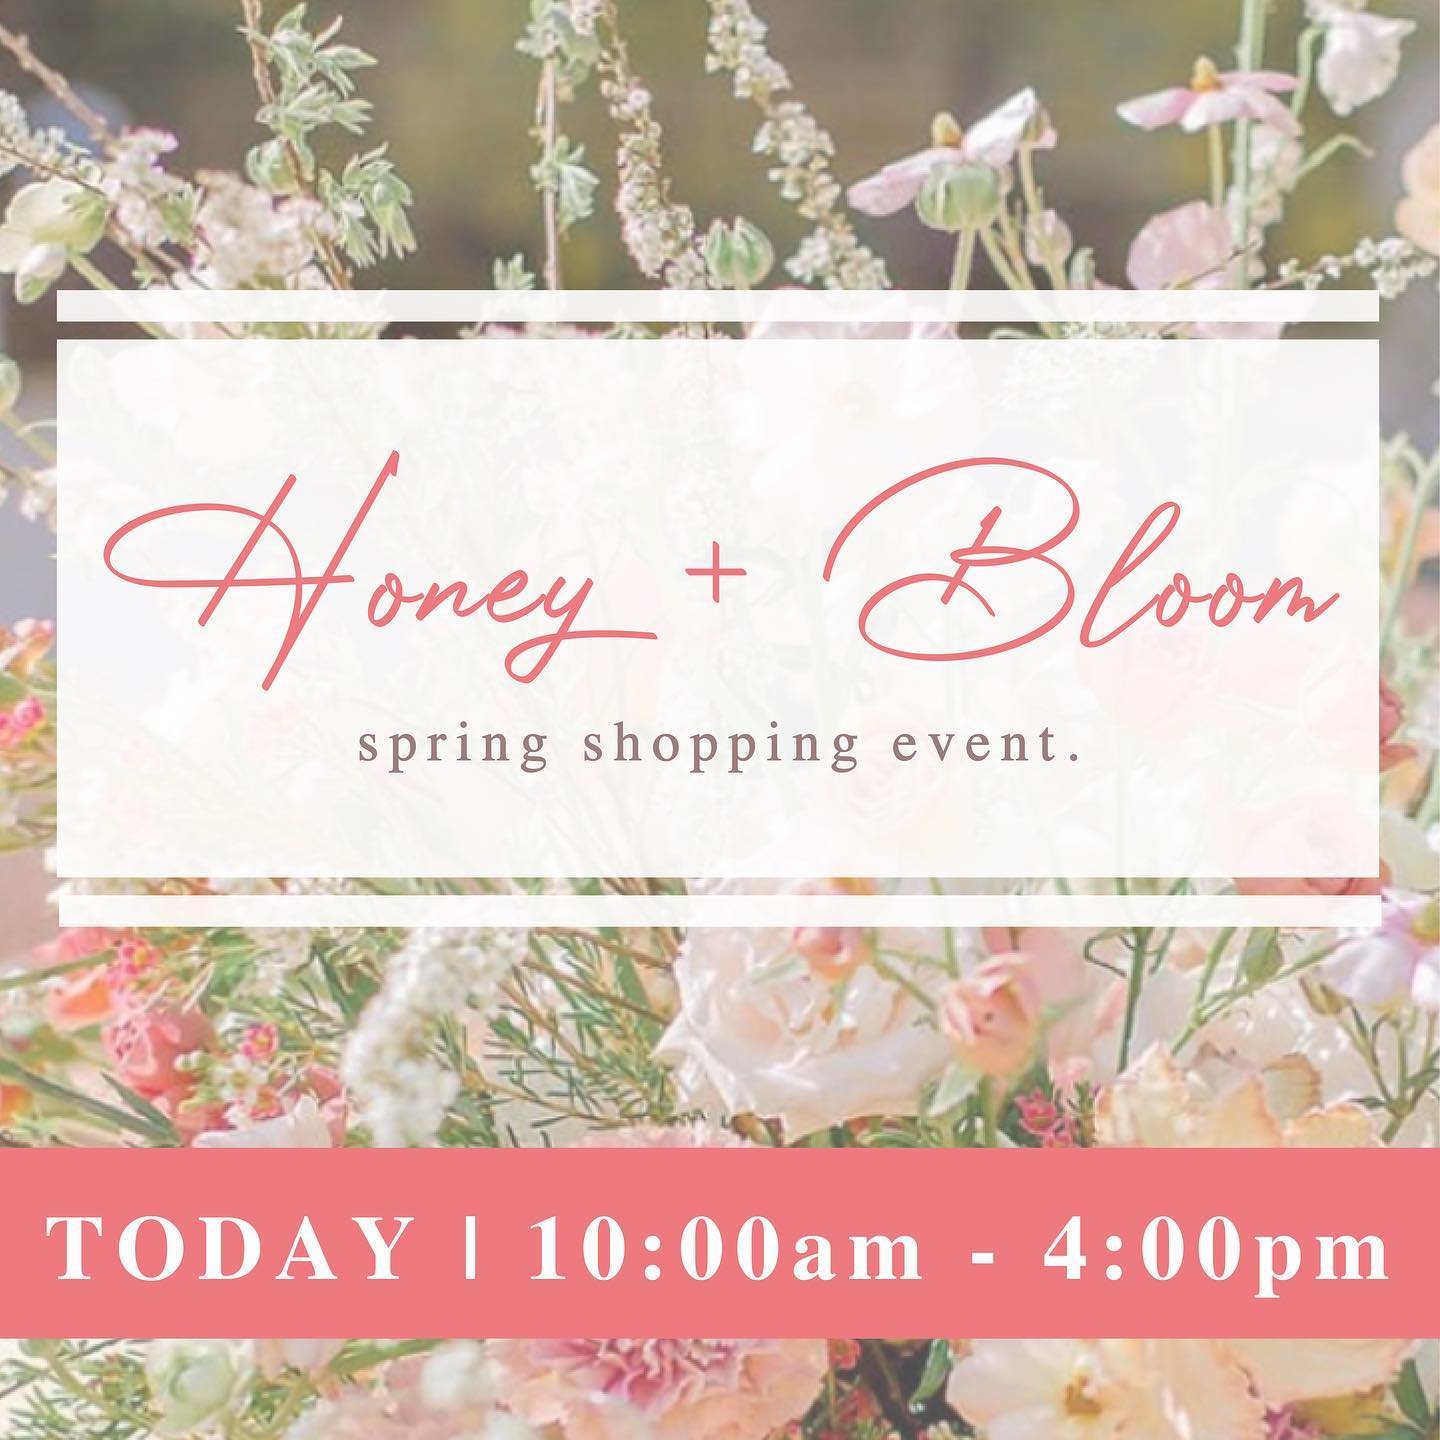 TODAY IS THE DAY! 🌸💐🛍️ 

Join us at The Shops today from 10am-4pm for some family fun and spring shopping!